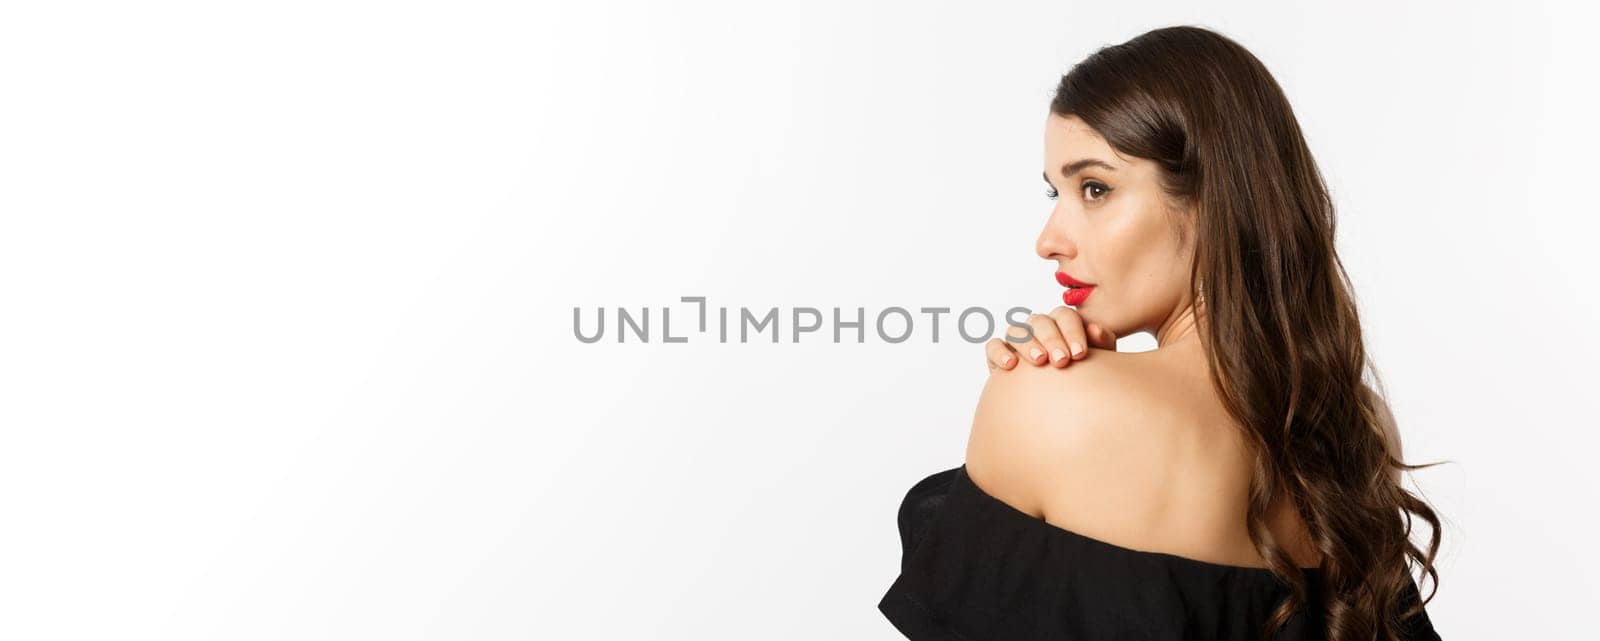 Fashion and beauty concept. Elegant woman leaning on shoulder and gazing aside with sensual piercing eyes, wearing makeup and red lipstick, standing over white background.